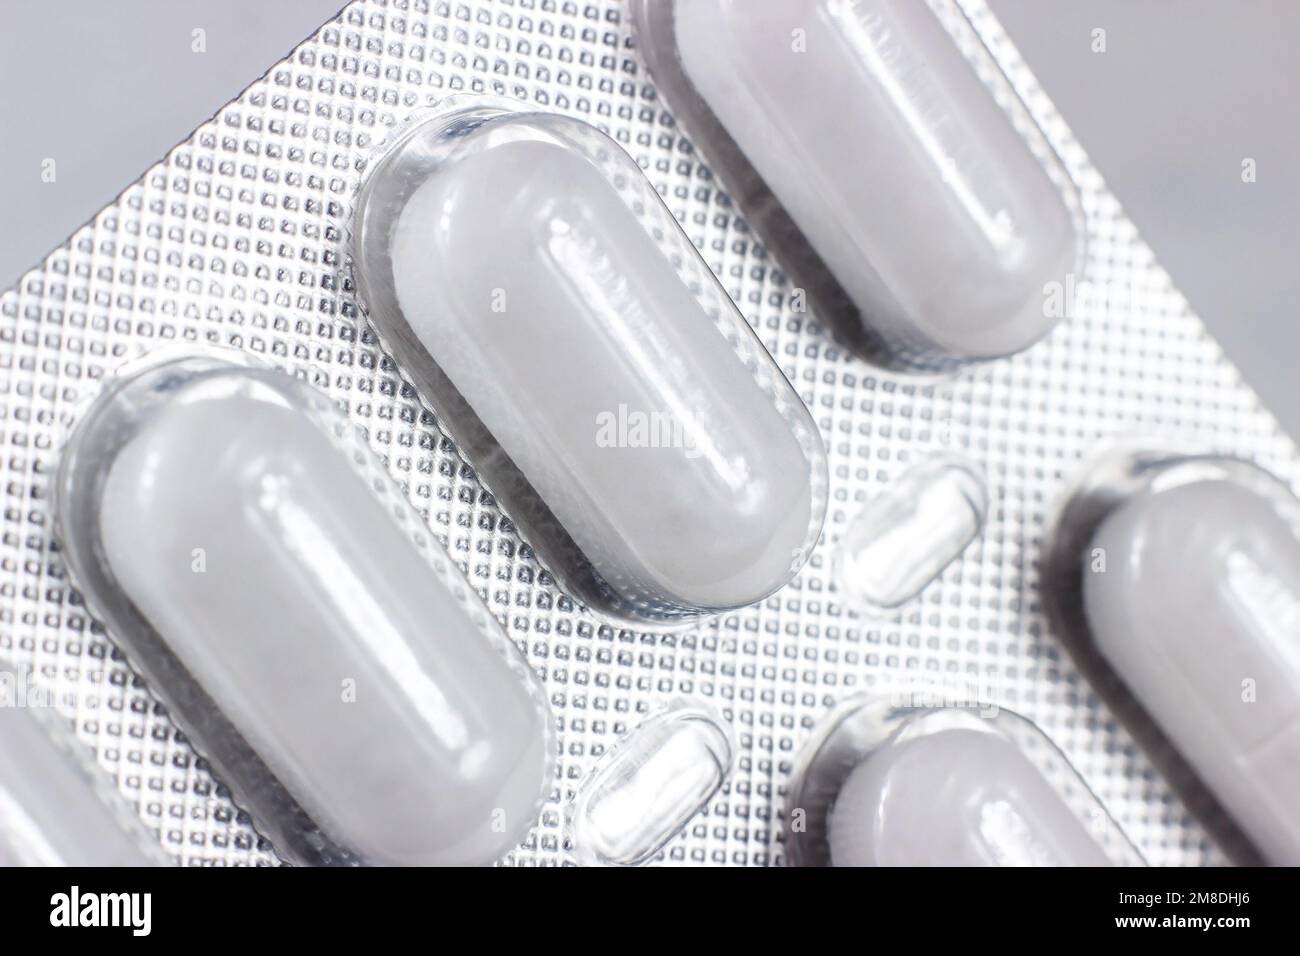 Silver and white foil blister pack with medical pills on light background close up. Stock Photo